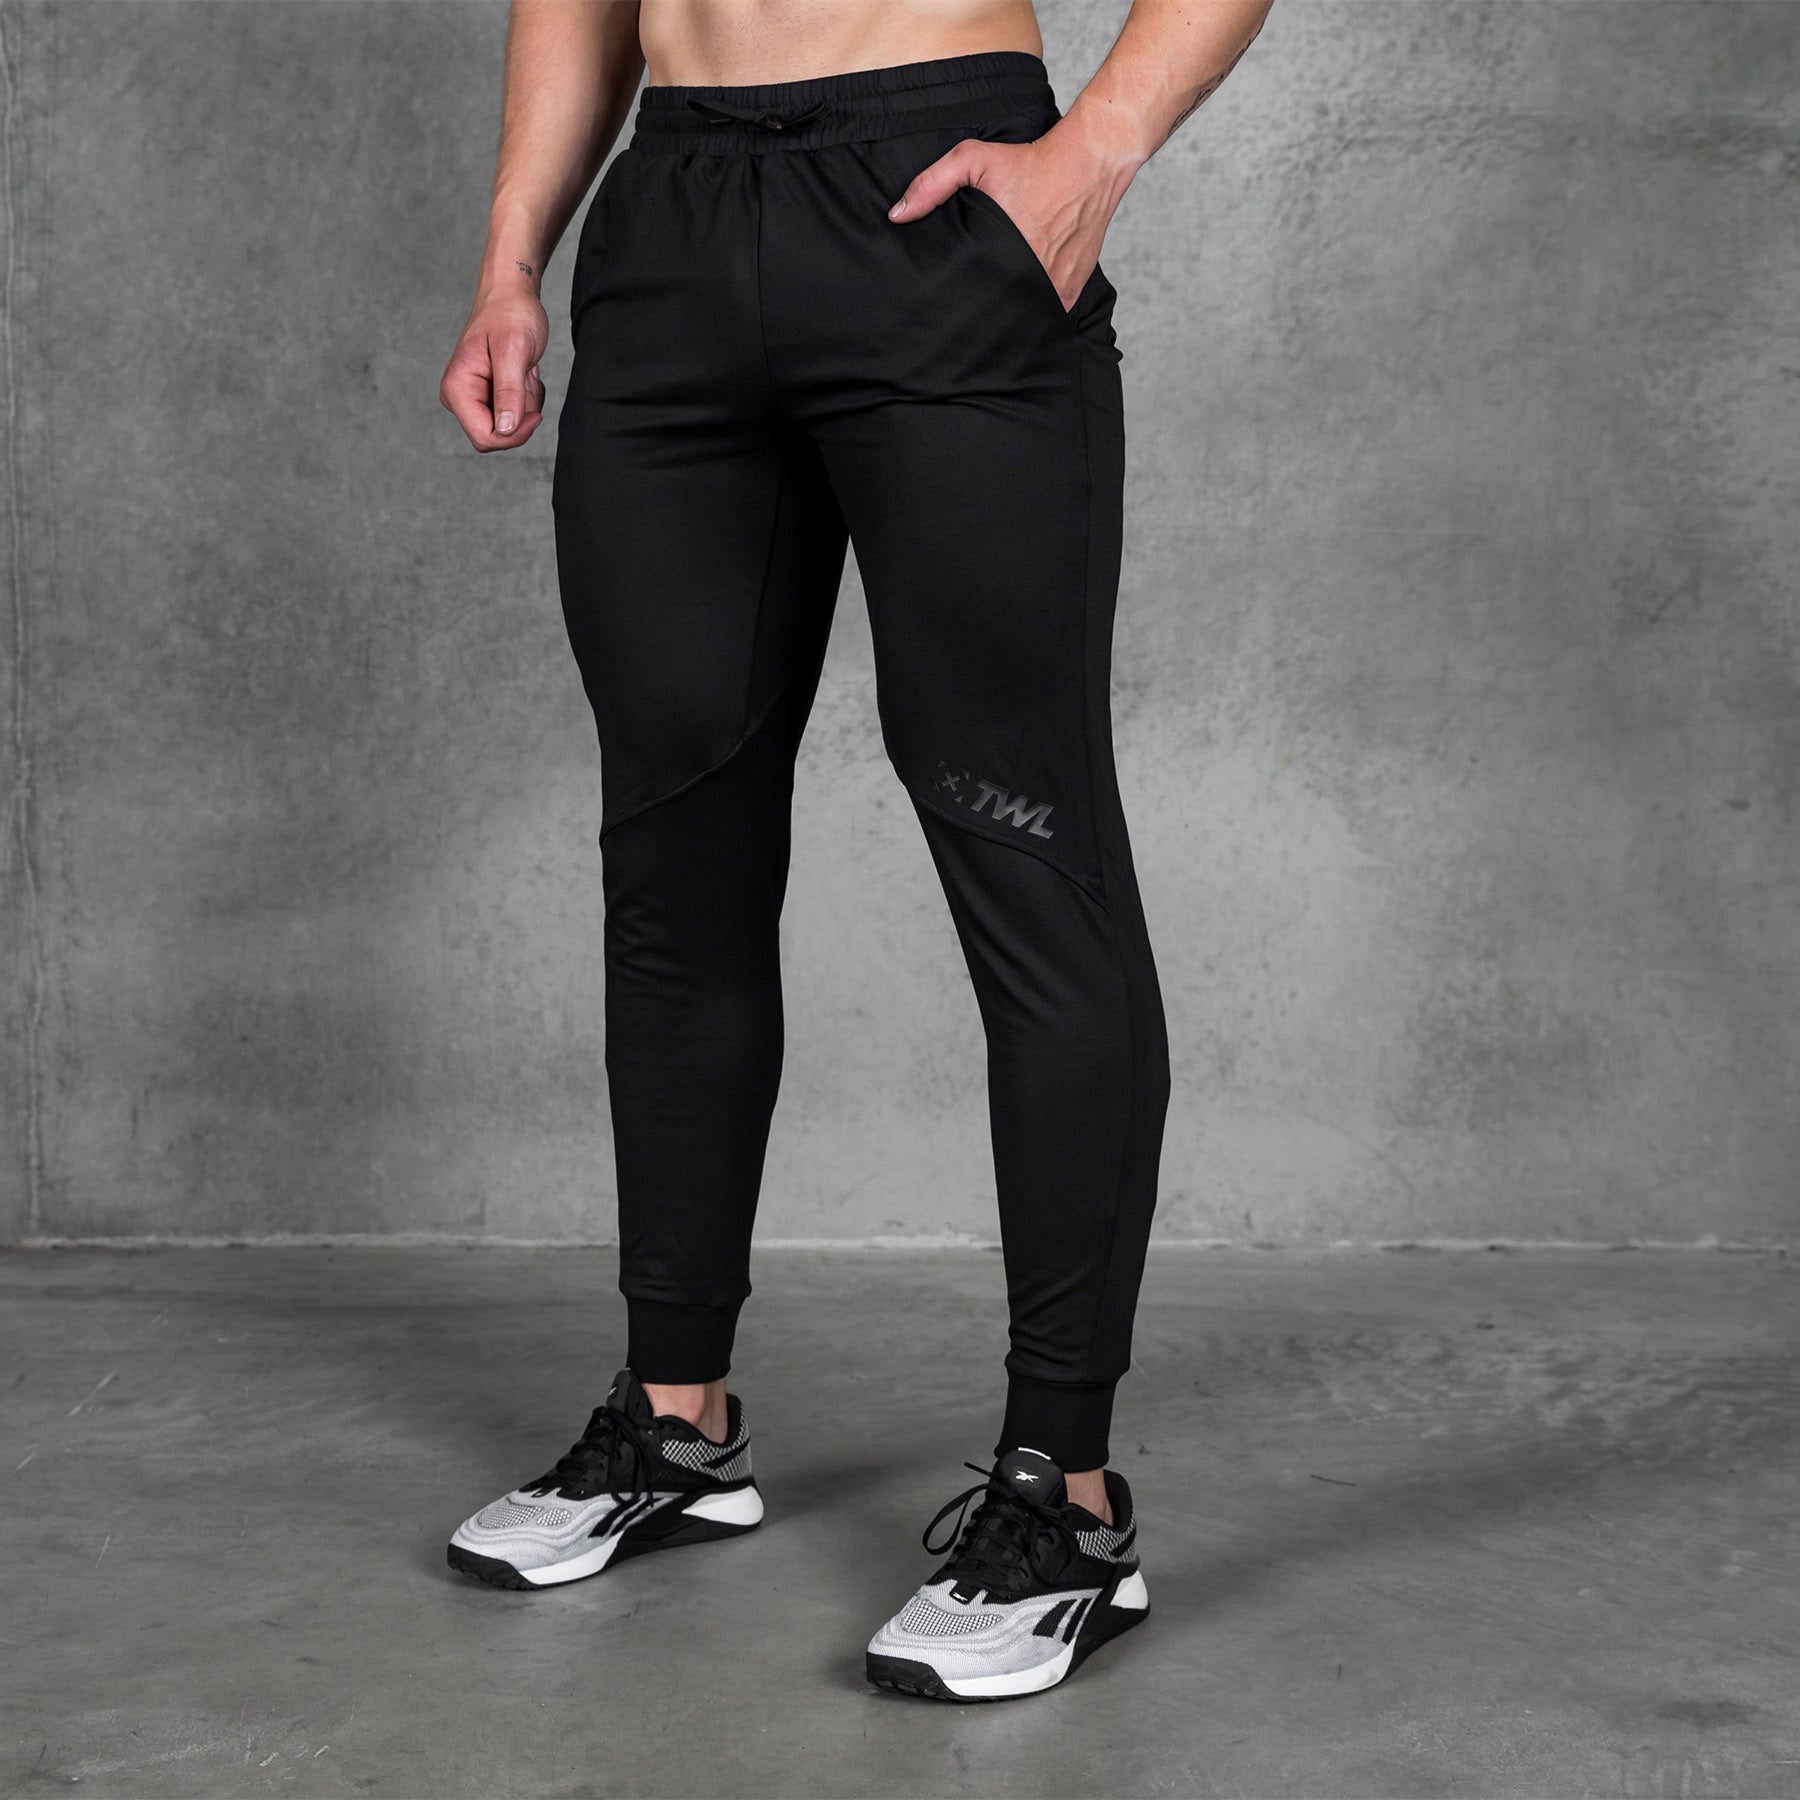 Men's Thermal Windproof WaterResistant Stretch Exercise Pants